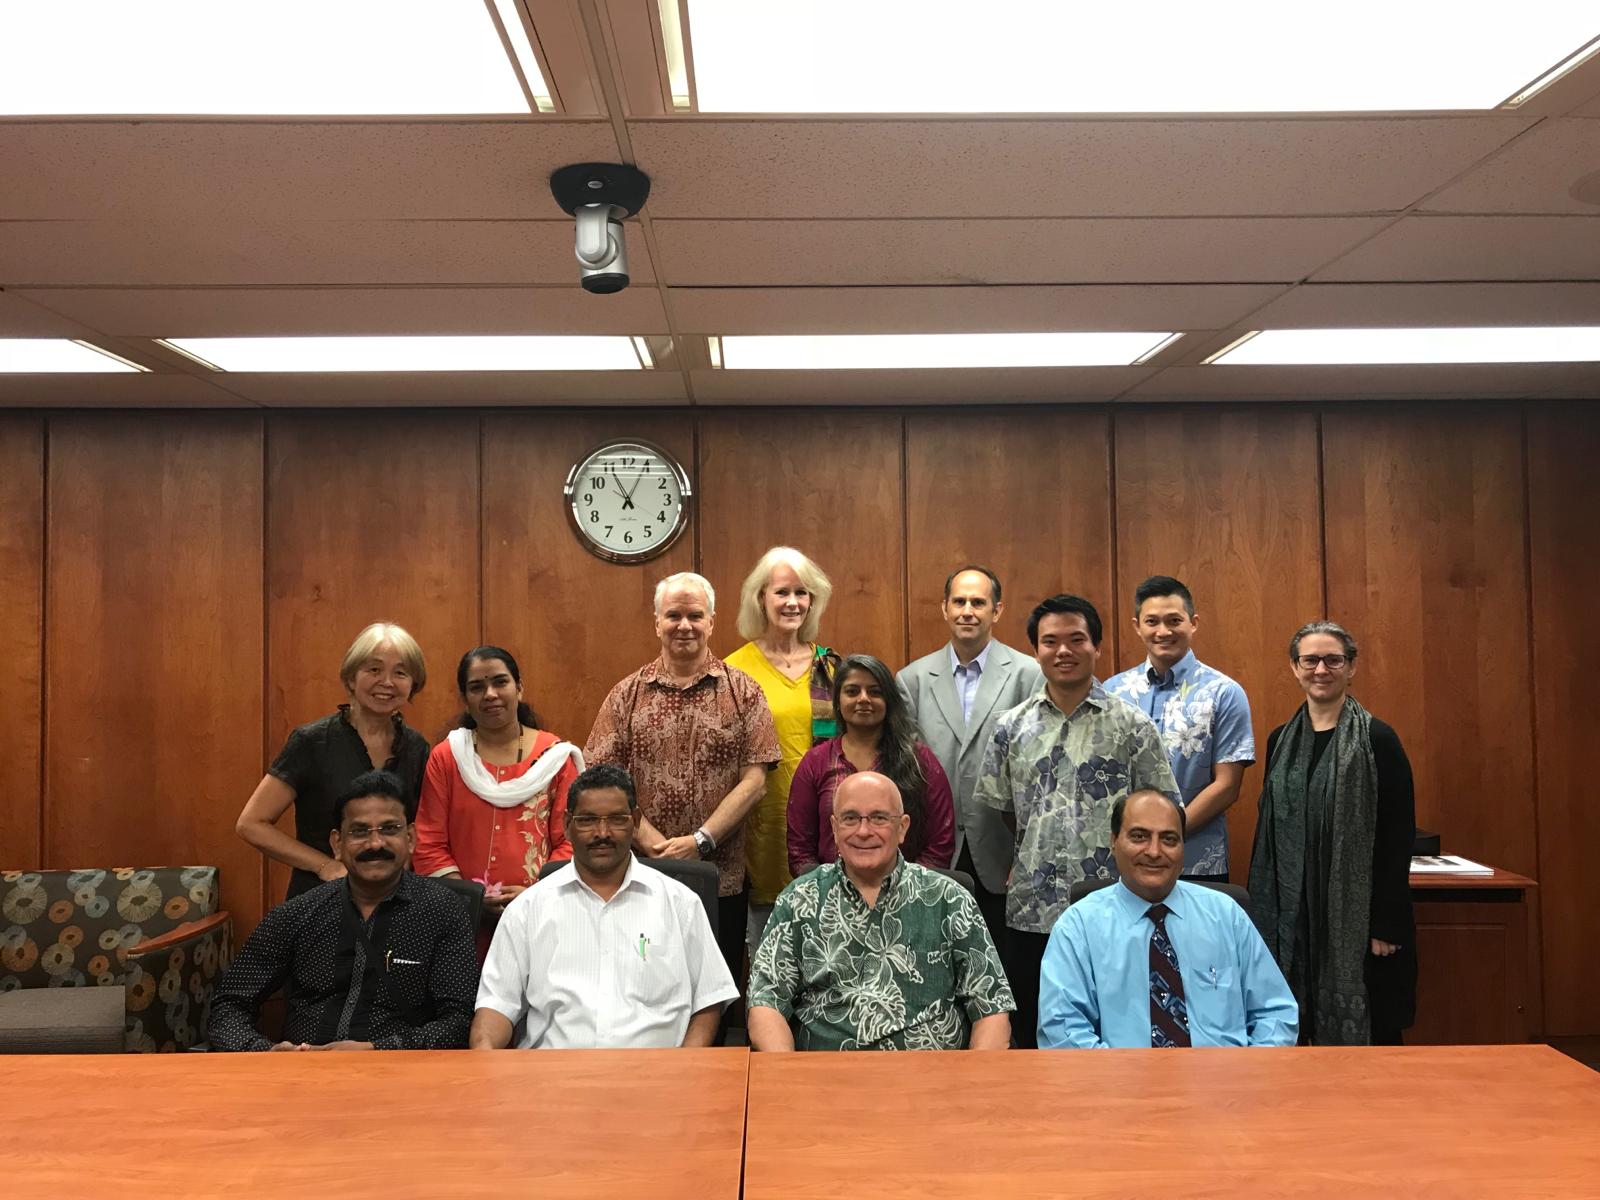 GIIP founder, Dr. Raj Kunar and Delegates from Goa met with the President and faculty staff members of East-West Center, University of Hawaii.